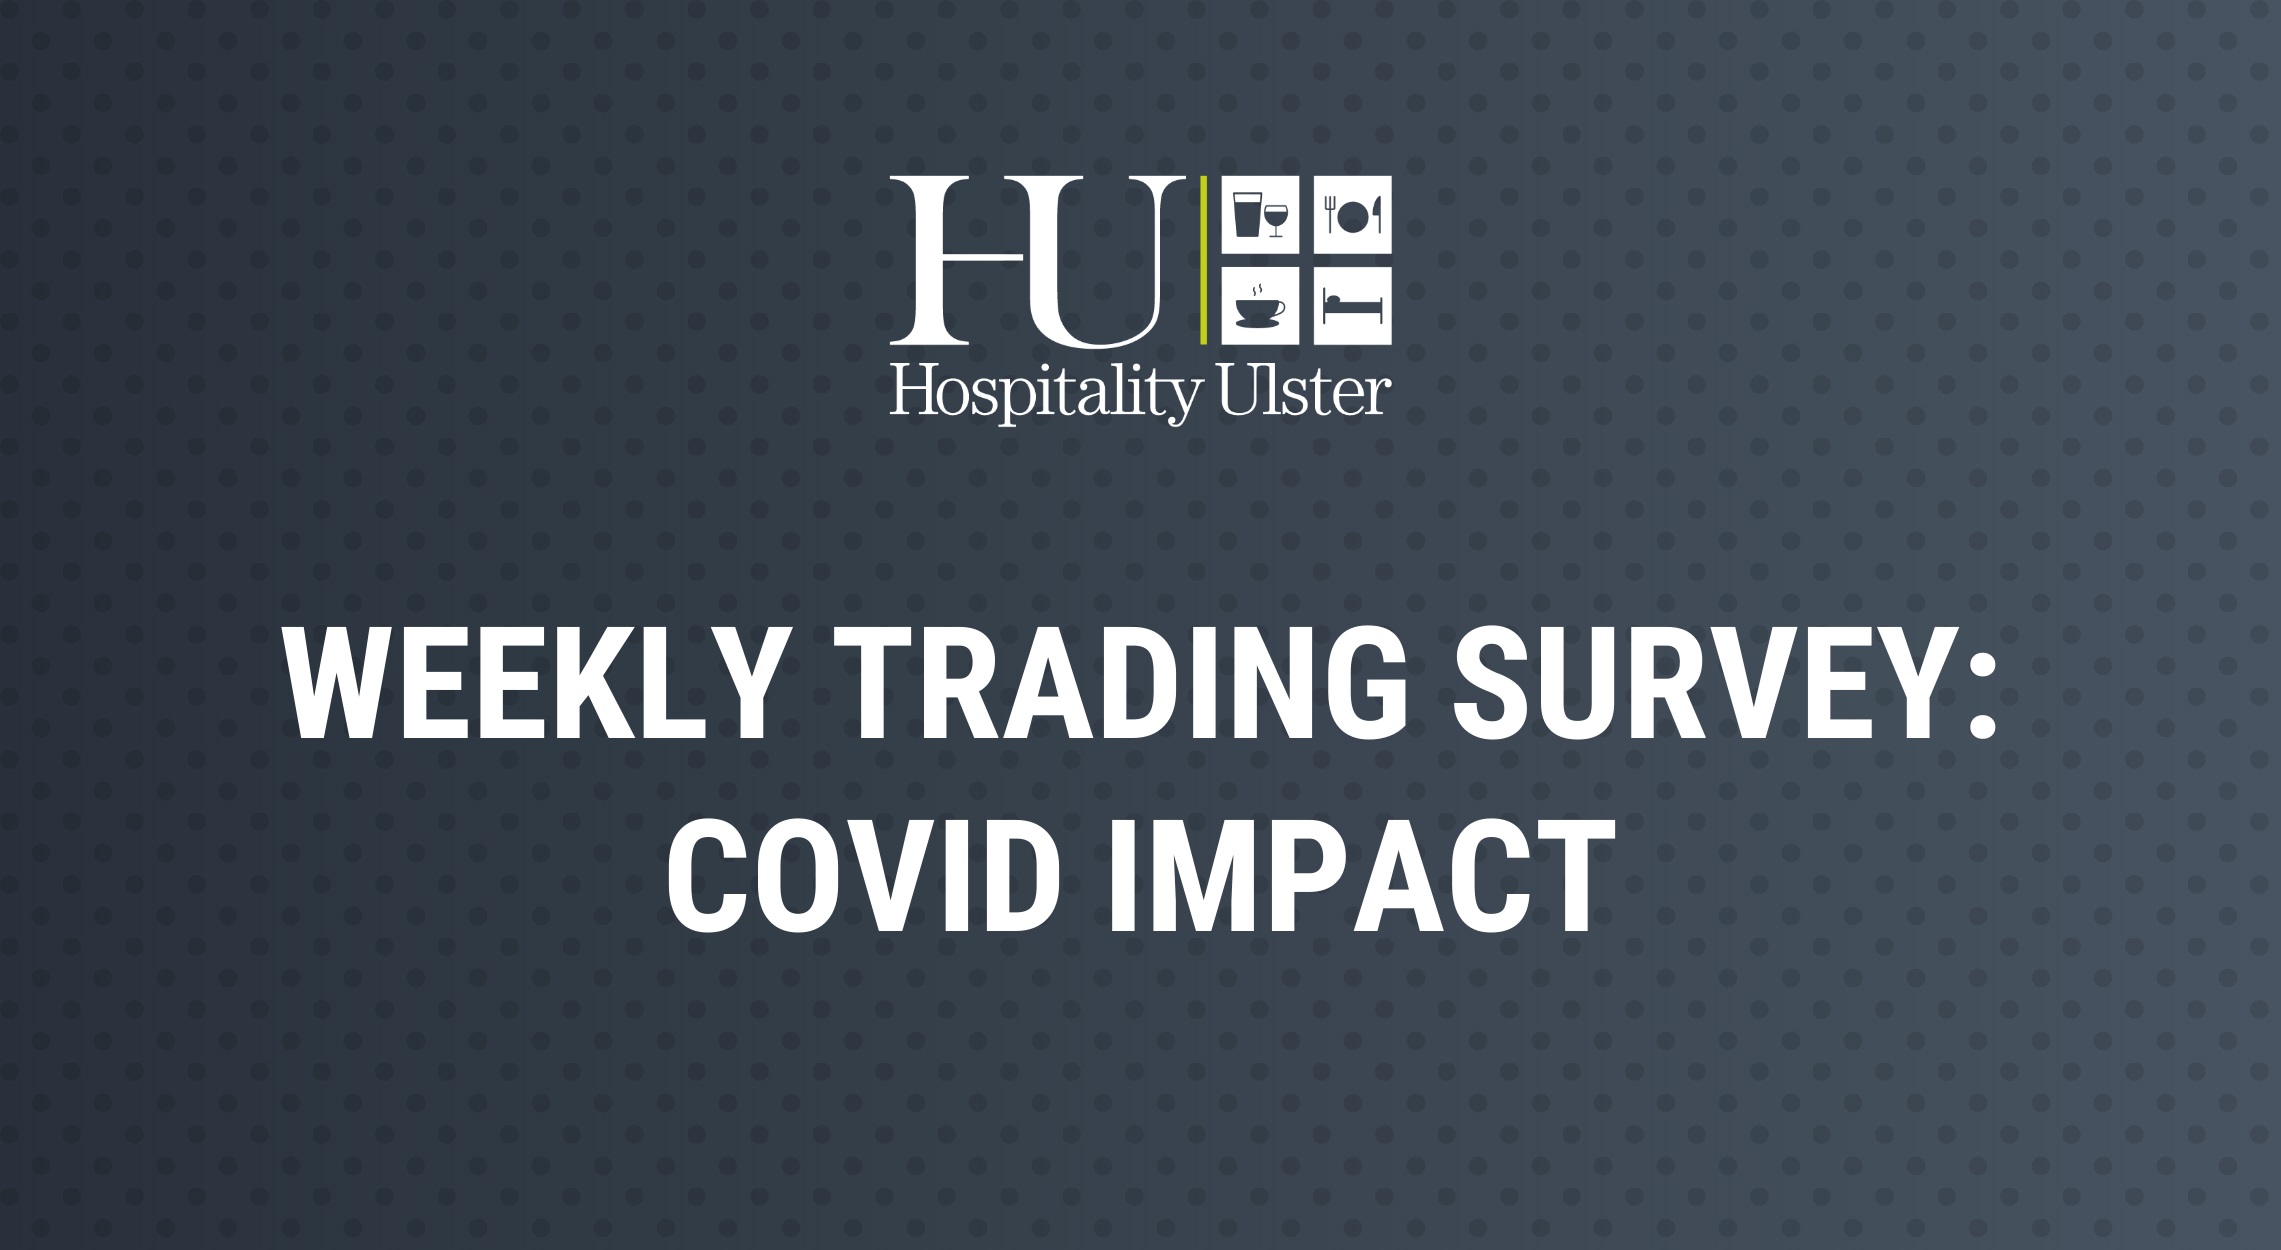 WEEKLY TRADING SURVEY - COVID IMPACT WC 13 DEC TO 19 DEC 21